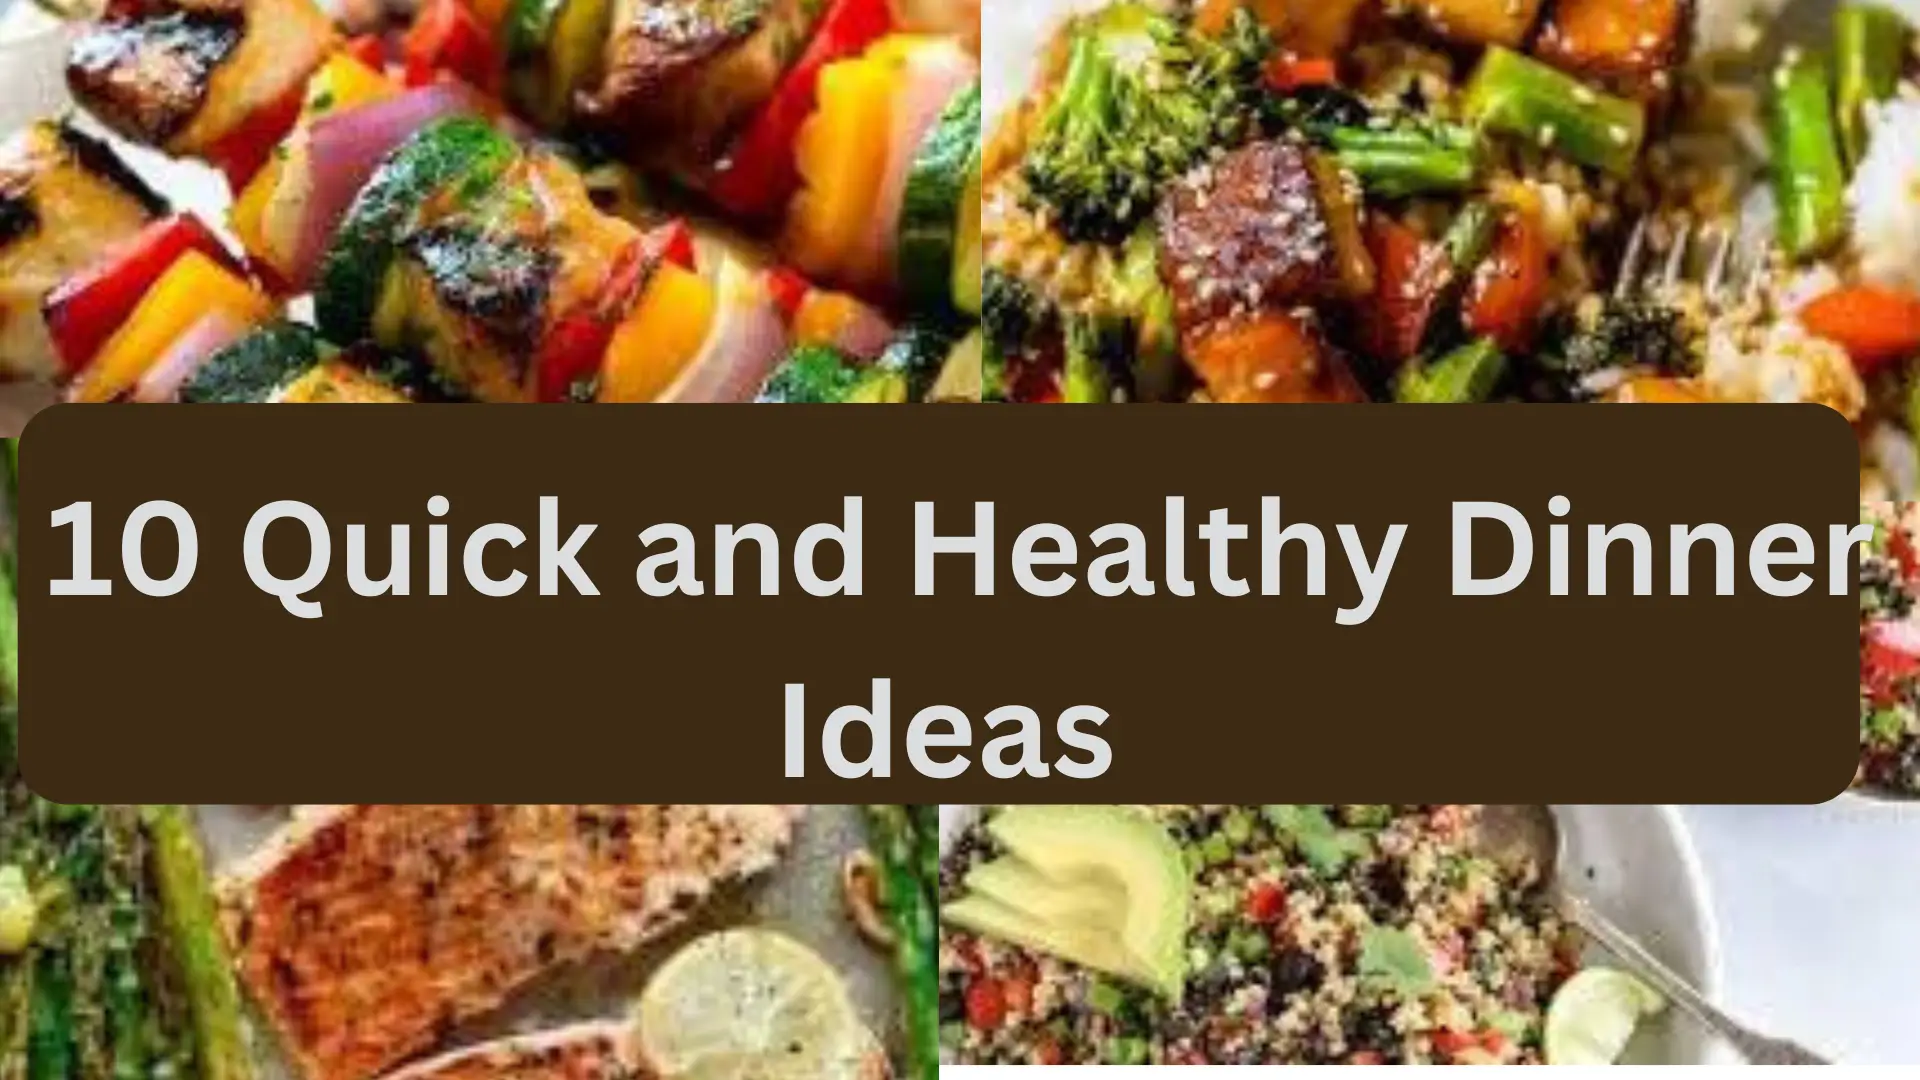 10 Quick and Healthy Dinner Ideas